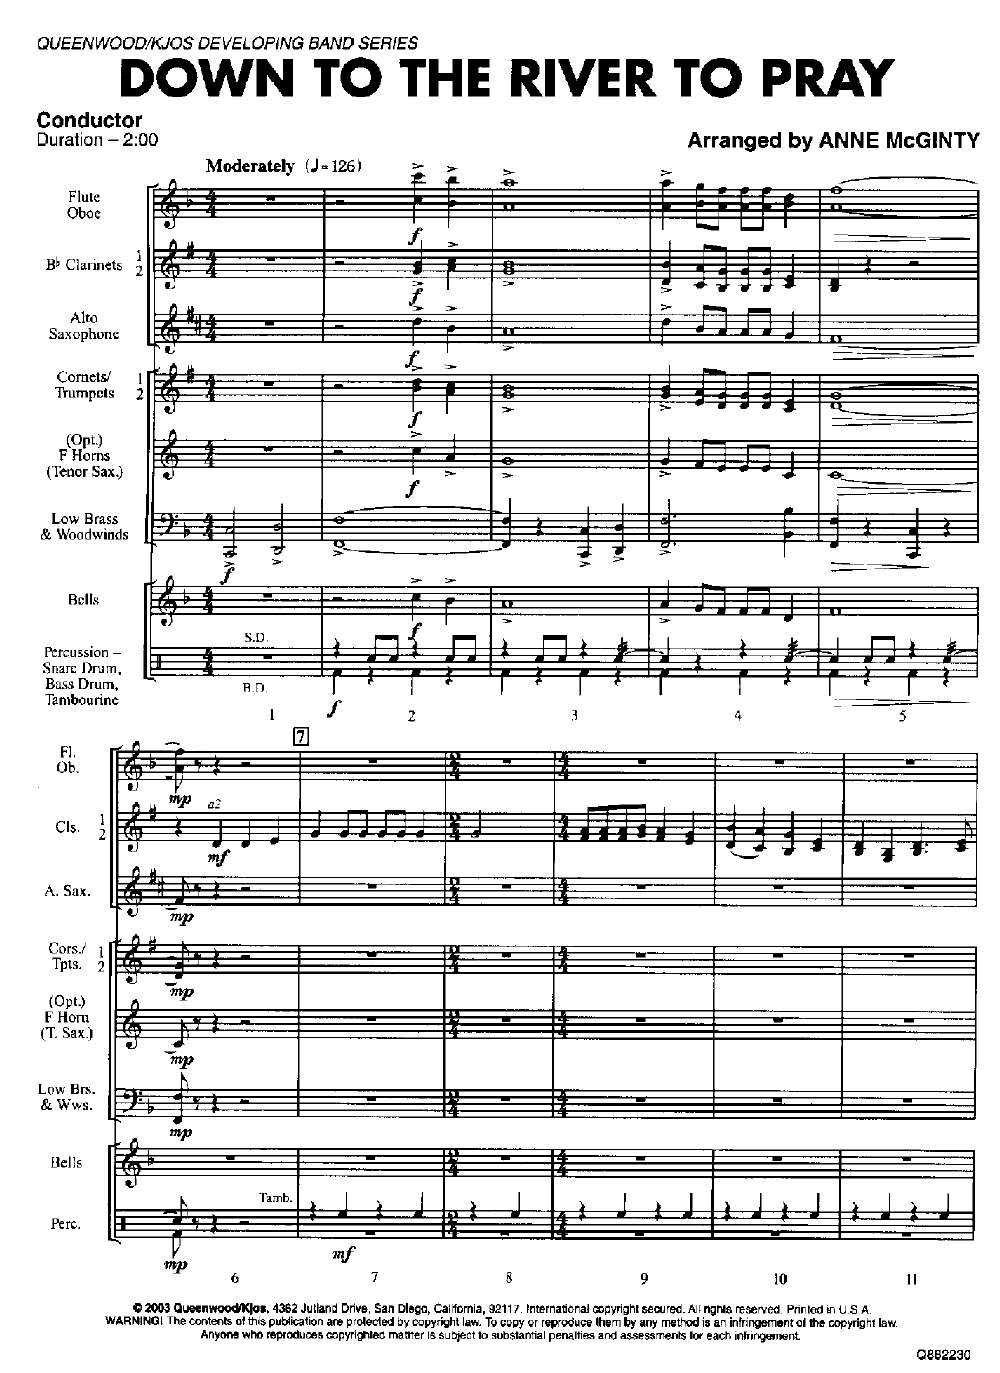 Down to the River to Pray arr. Anne McGinty| J.W. Pepper Sheet Music